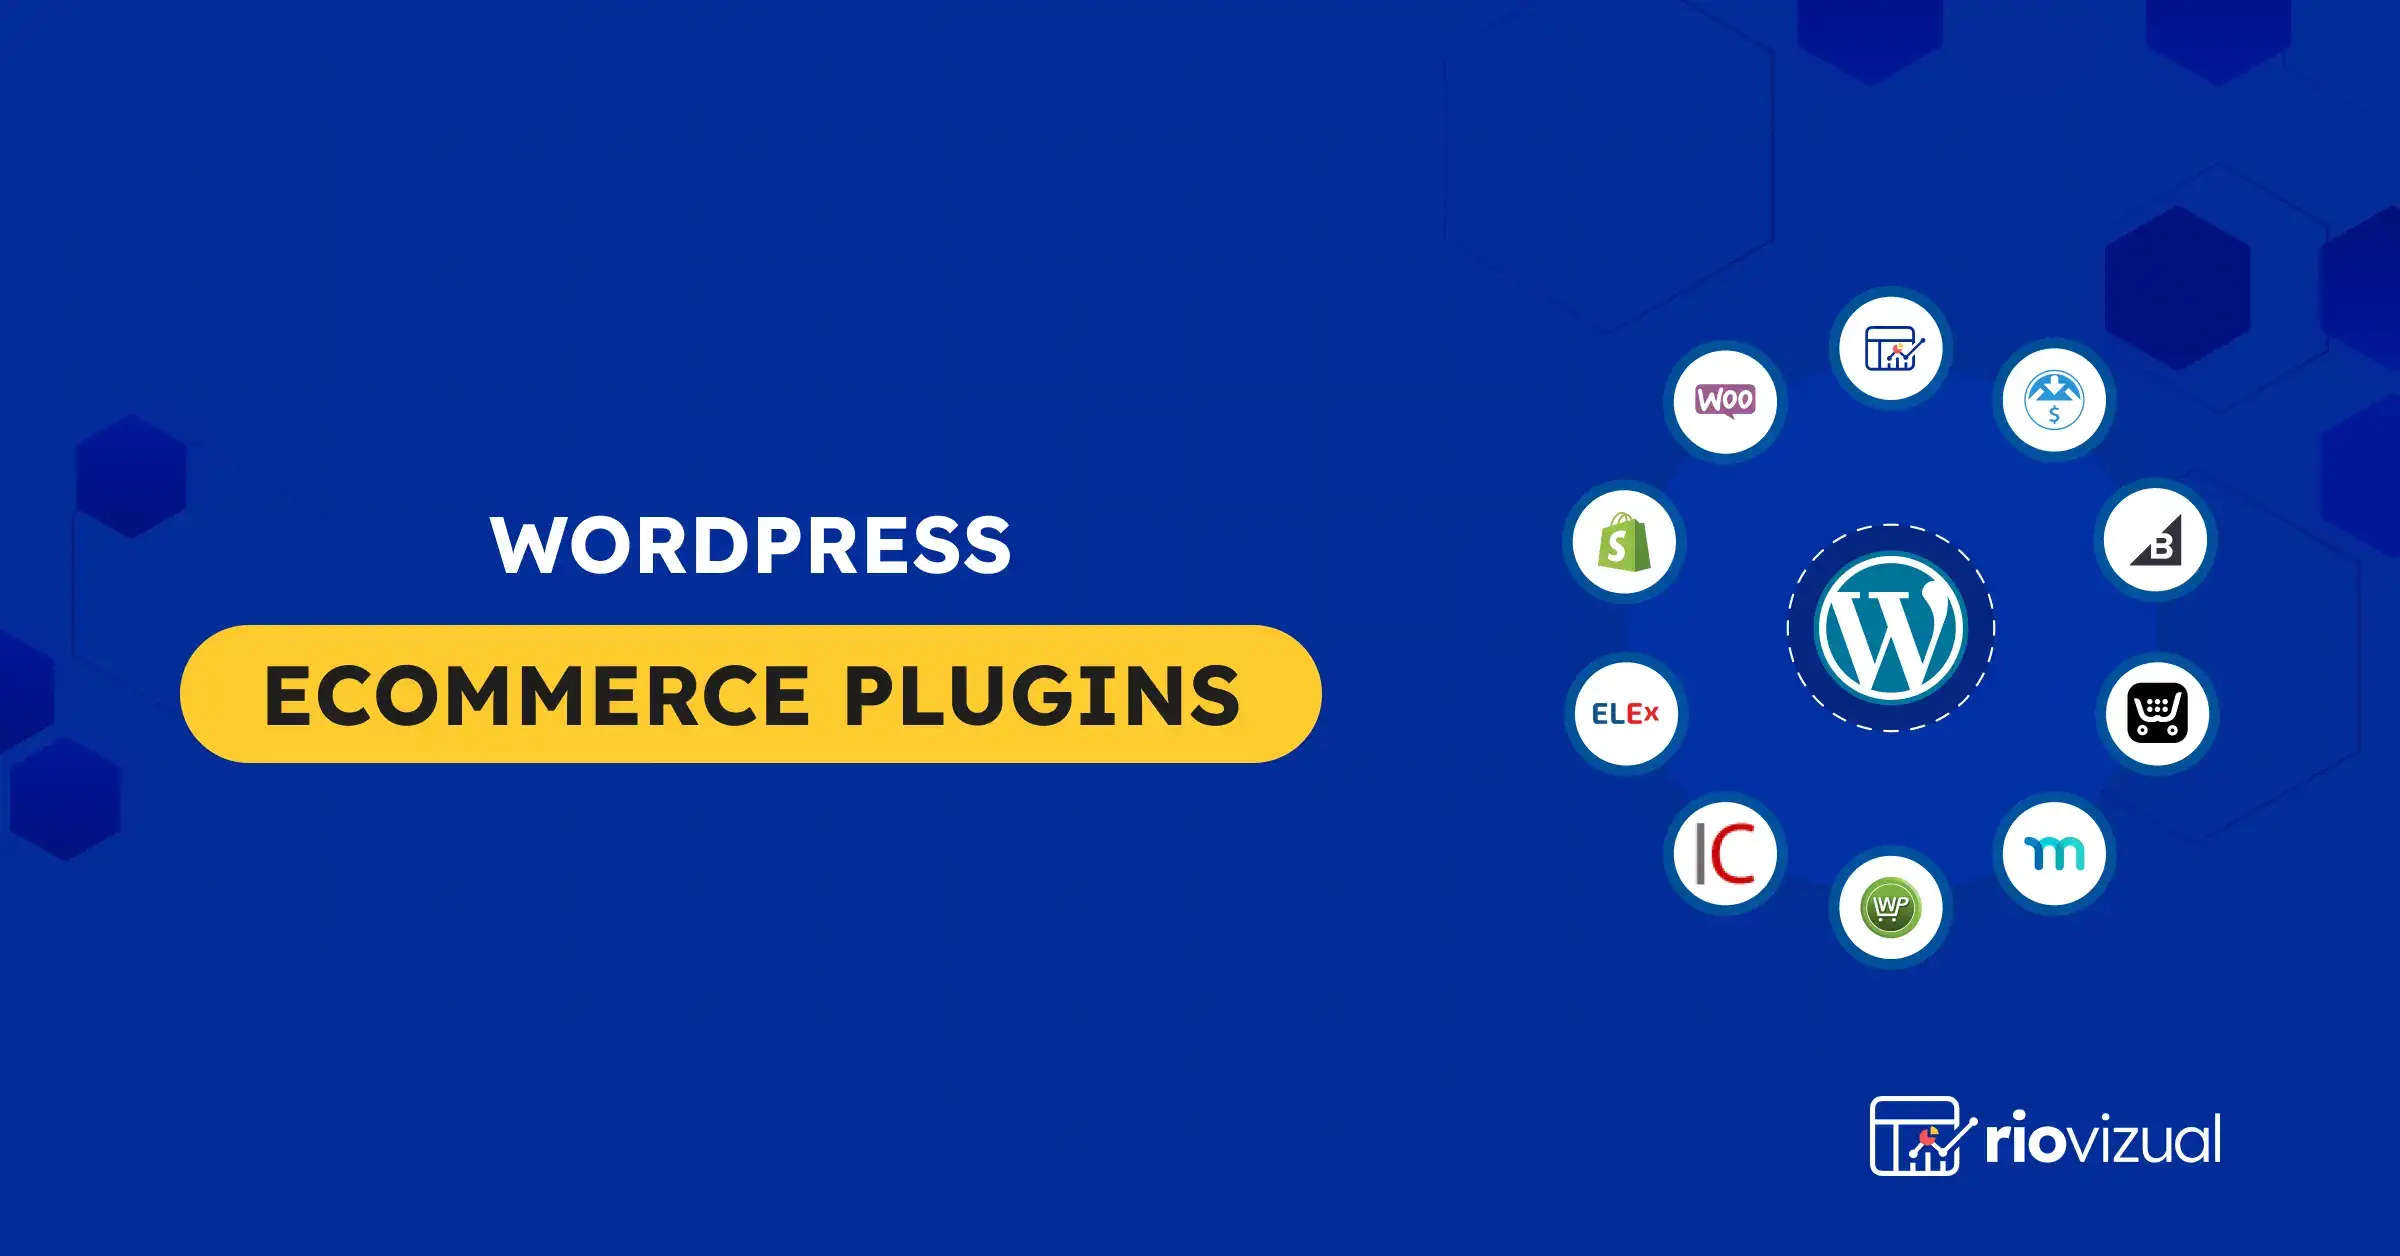 10 Best WordPress Ecommerce Plugins for Your Online Store